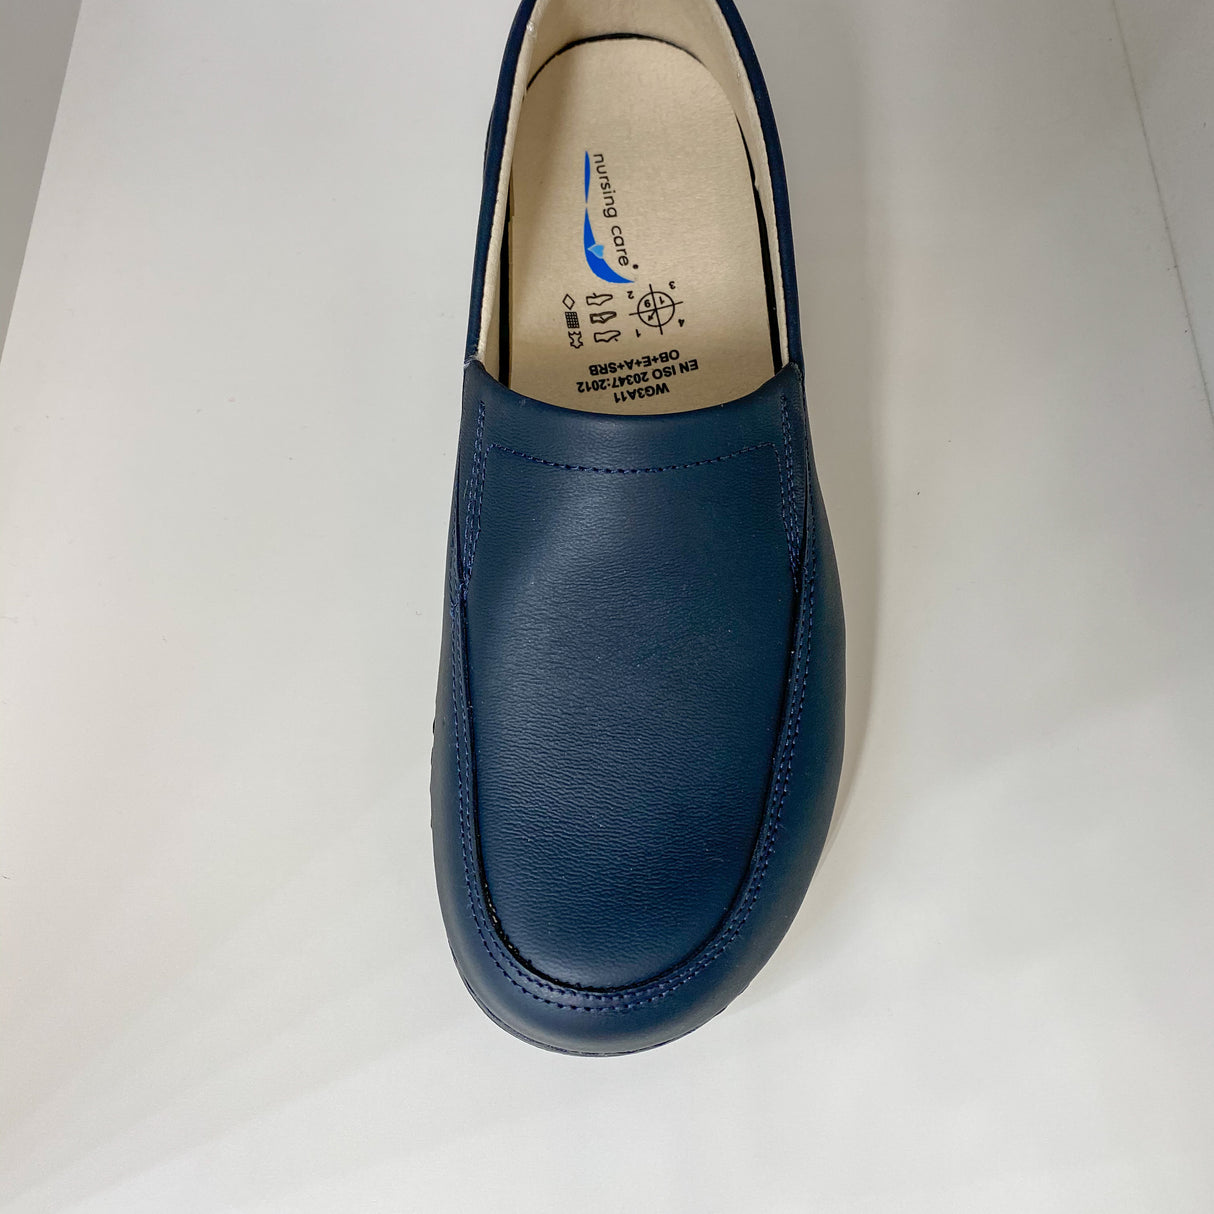 Comfort shoes for work | DARK BLUE | Rome